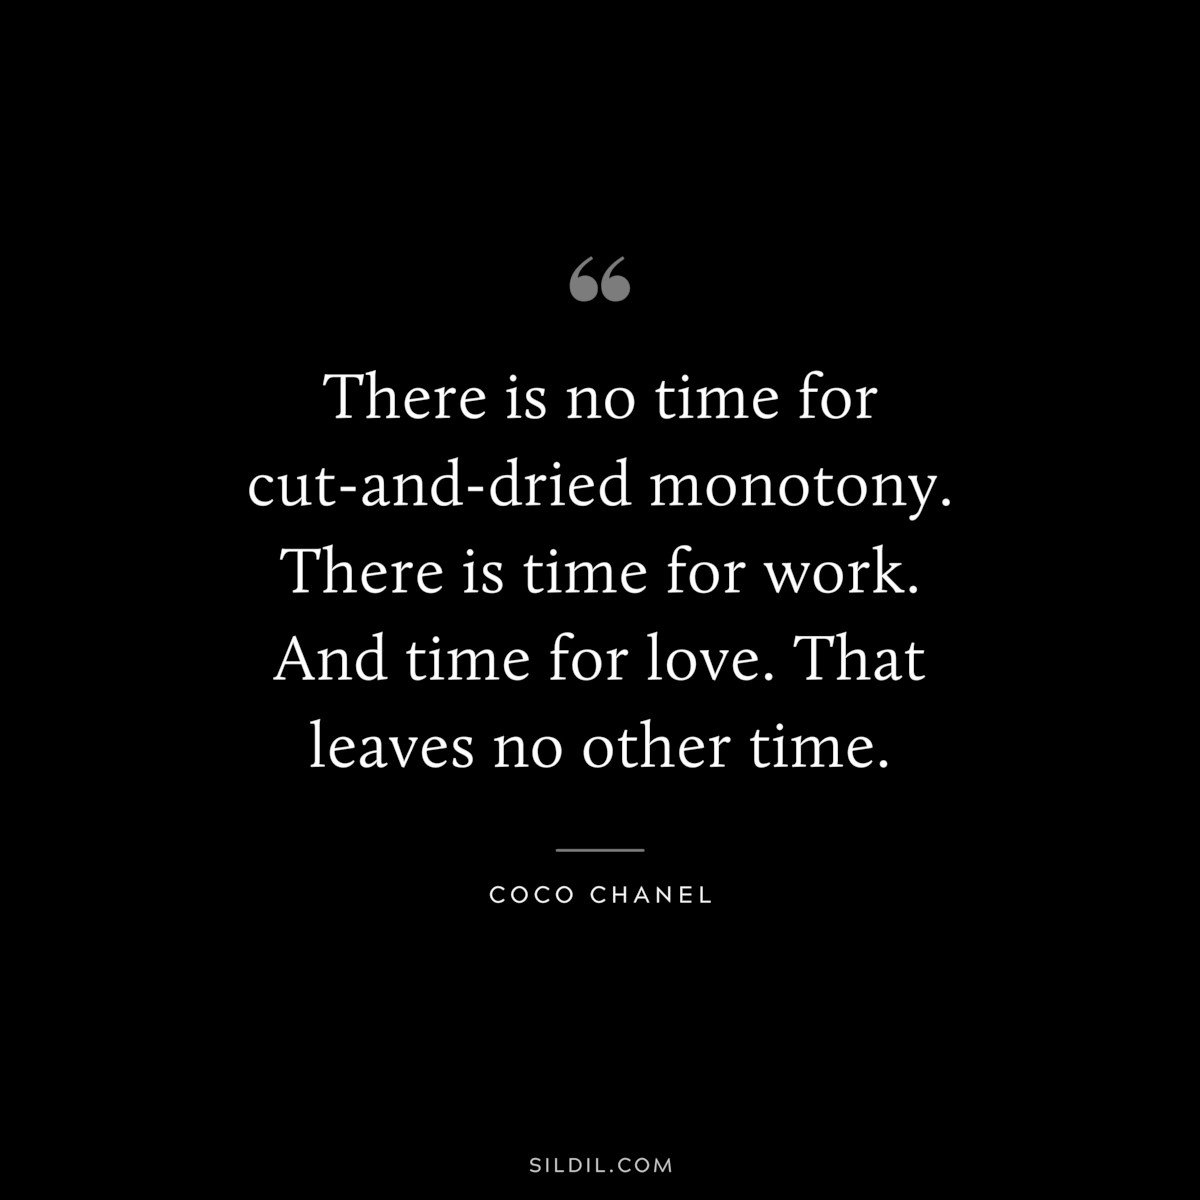 There is no time for cut-and-dried monotony. There is time for work. And time for love. That leaves no other time. ― Coco Chanel